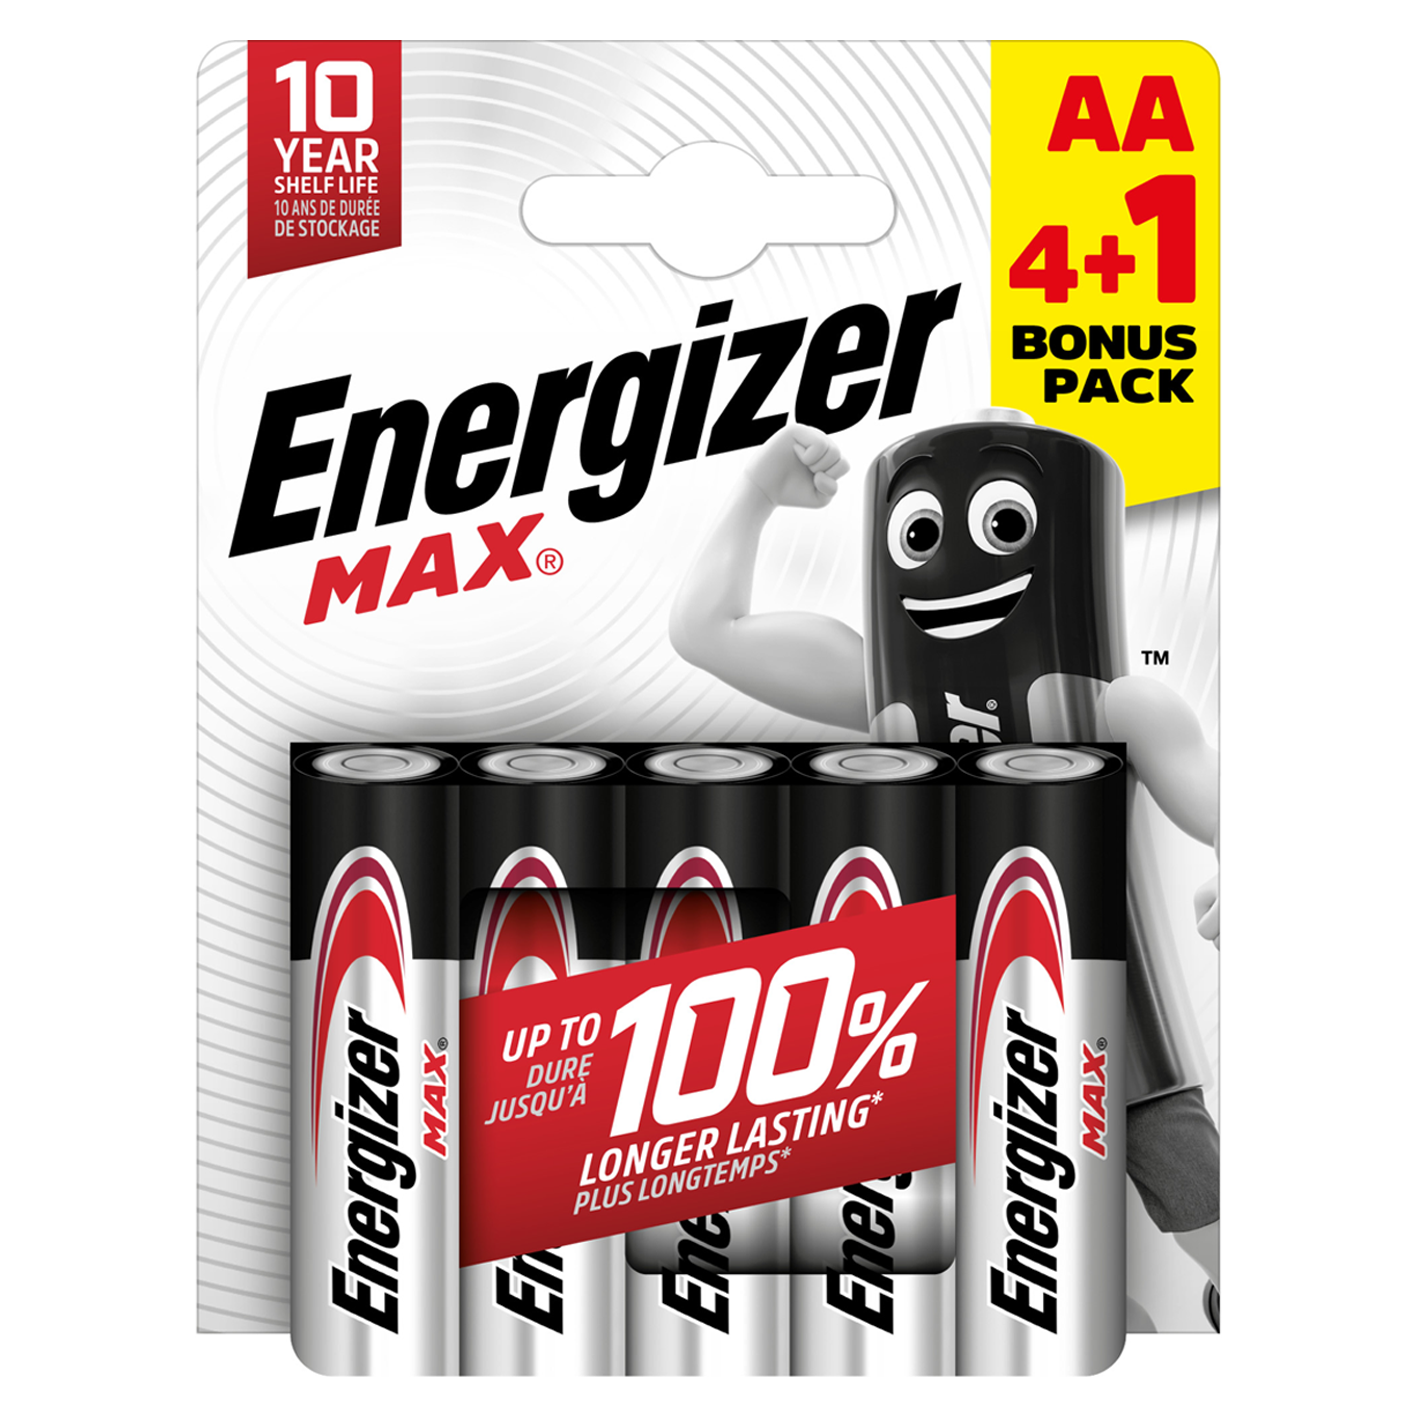 Energizer AA Max Alkaline, Pack of 4+1